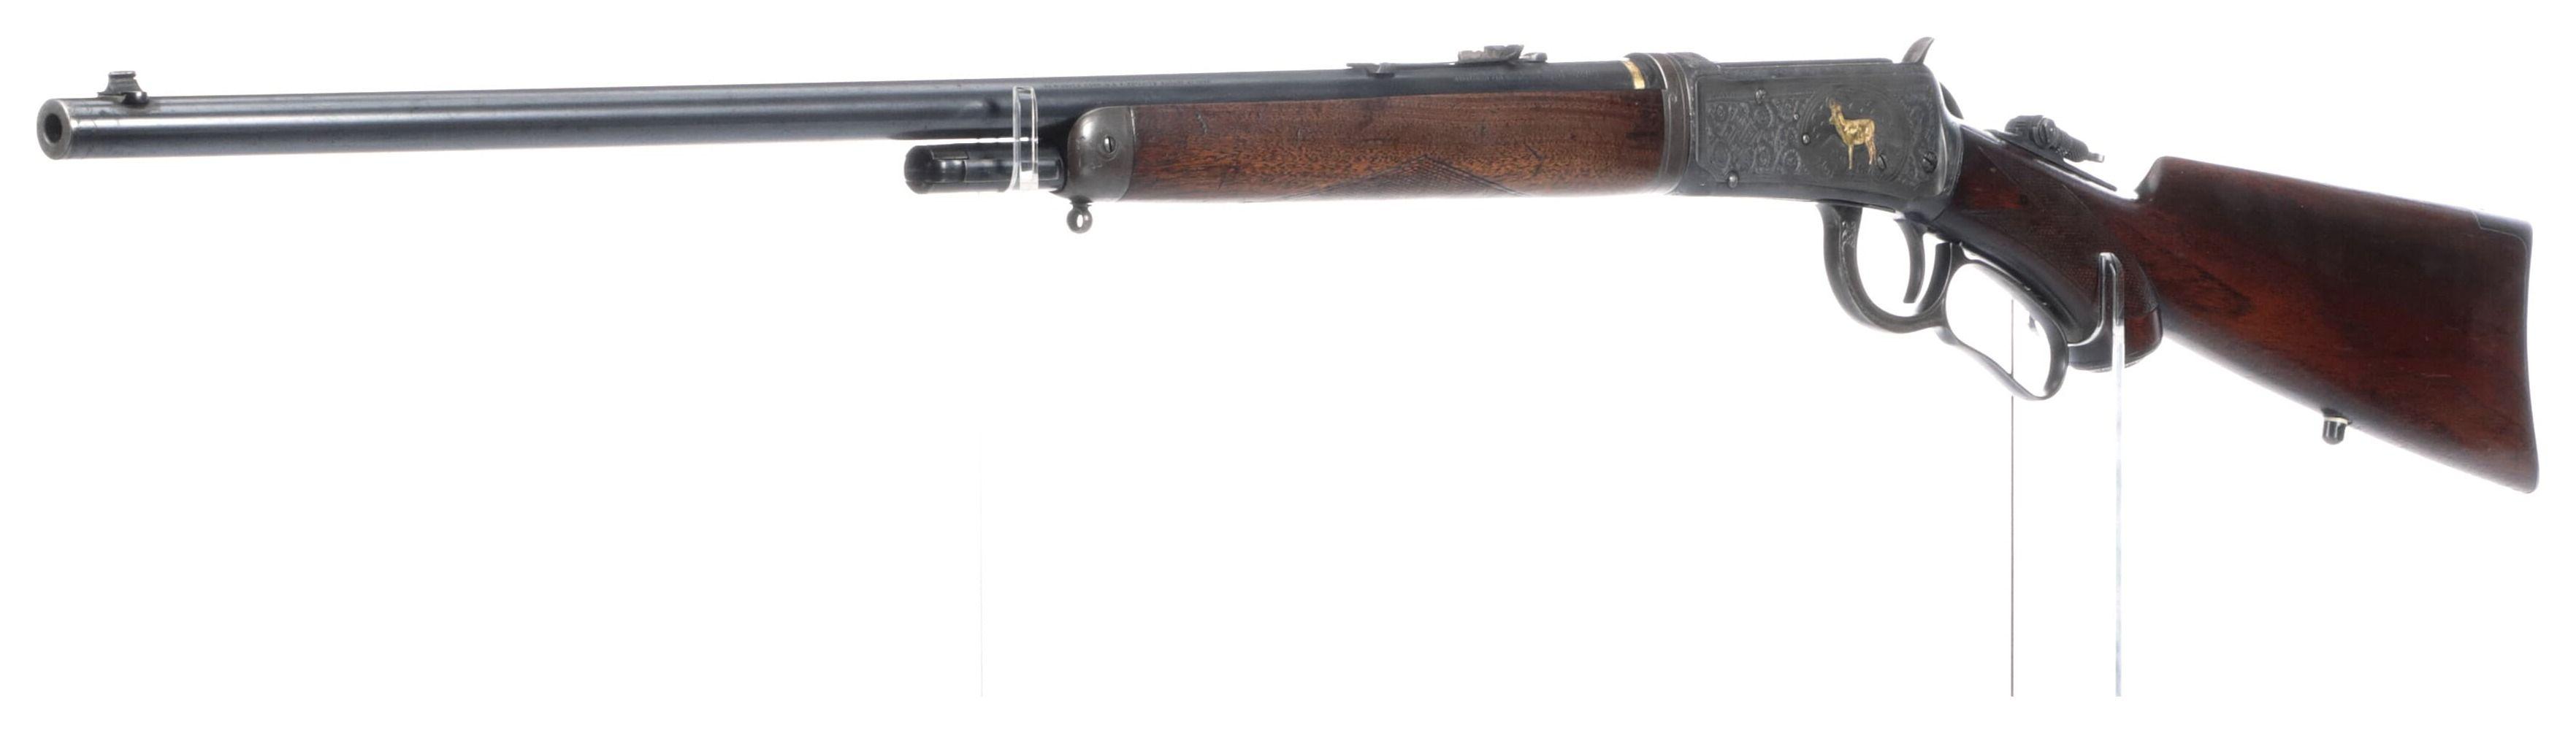 Engraved/Inlaid Winchester Model 1894 Takedown Rifle